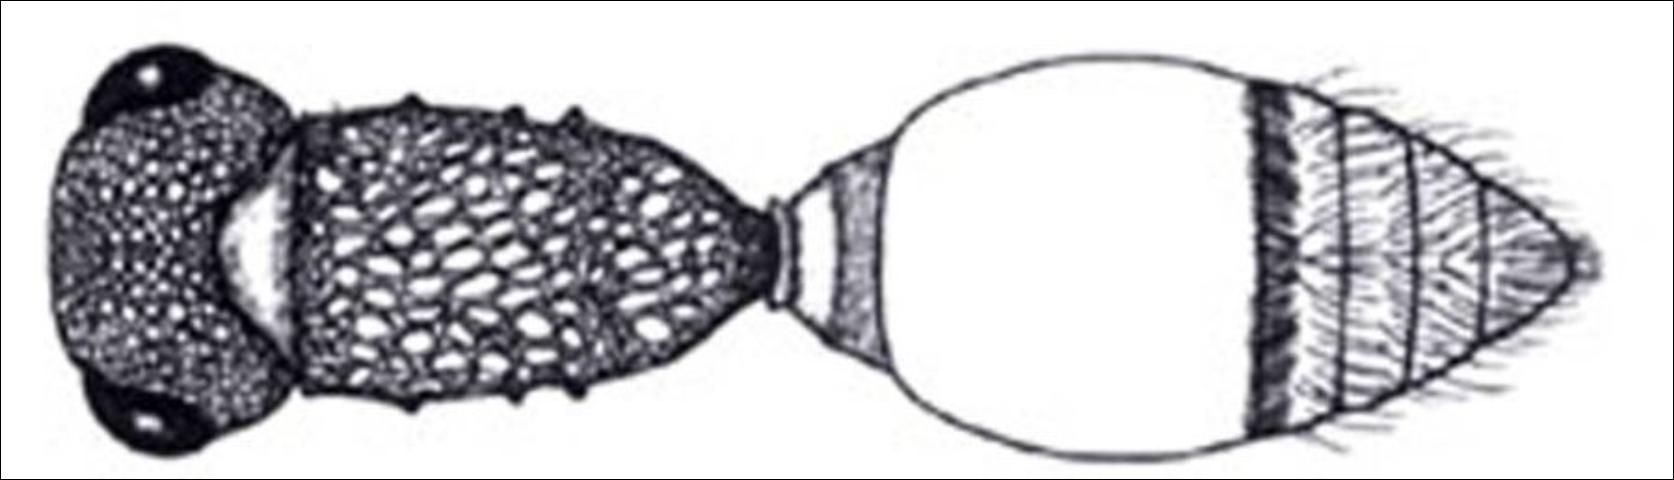 Figure 17. Dorsal view of tuberculate anterior and propodeal spiracles of Lomachaeta variegata.